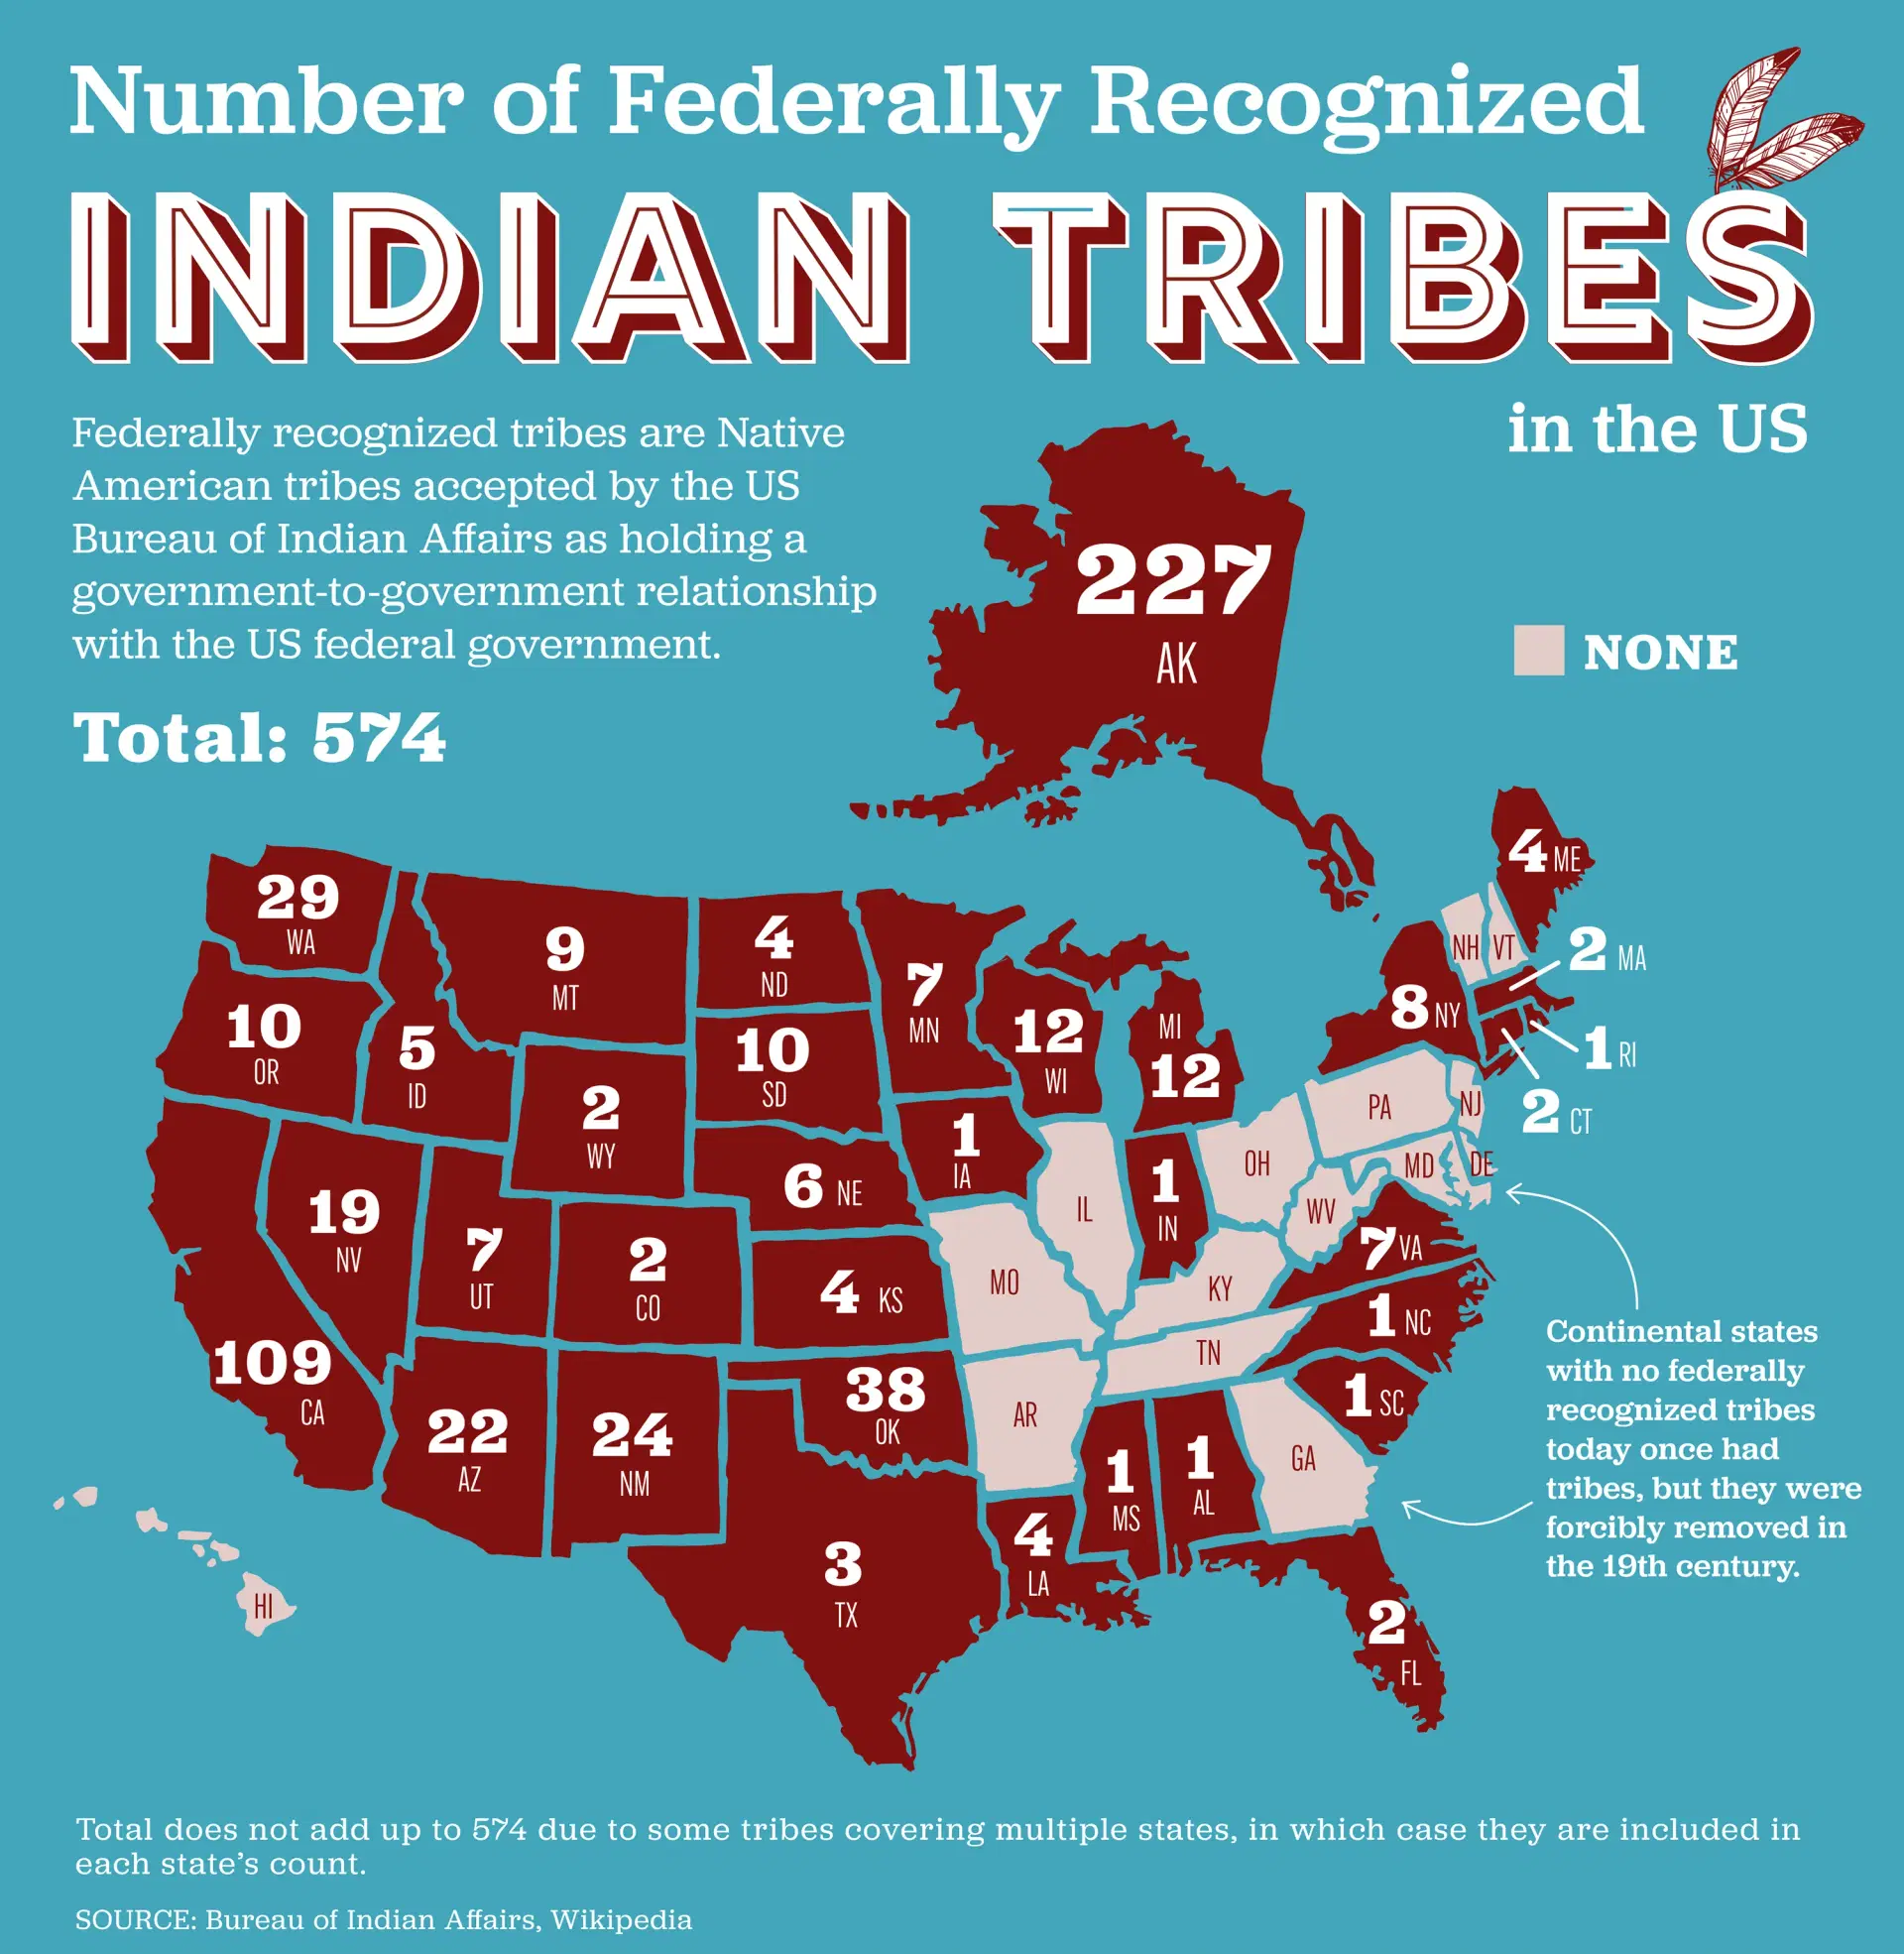 Number of Indian Tribes in the US